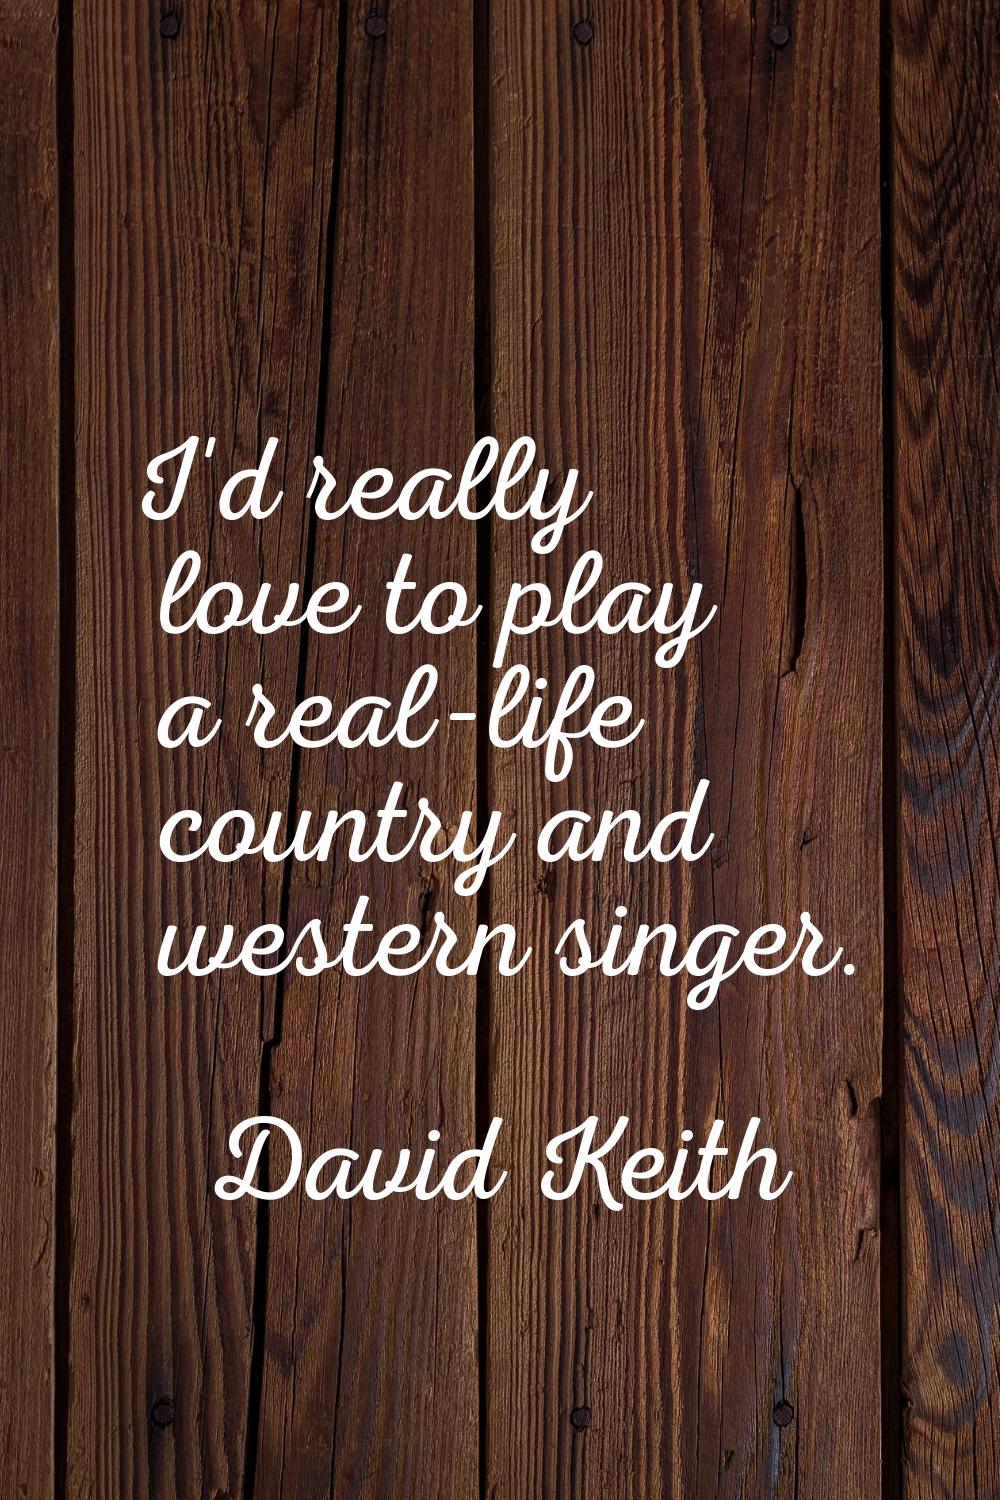 I'd really love to play a real-life country and western singer.